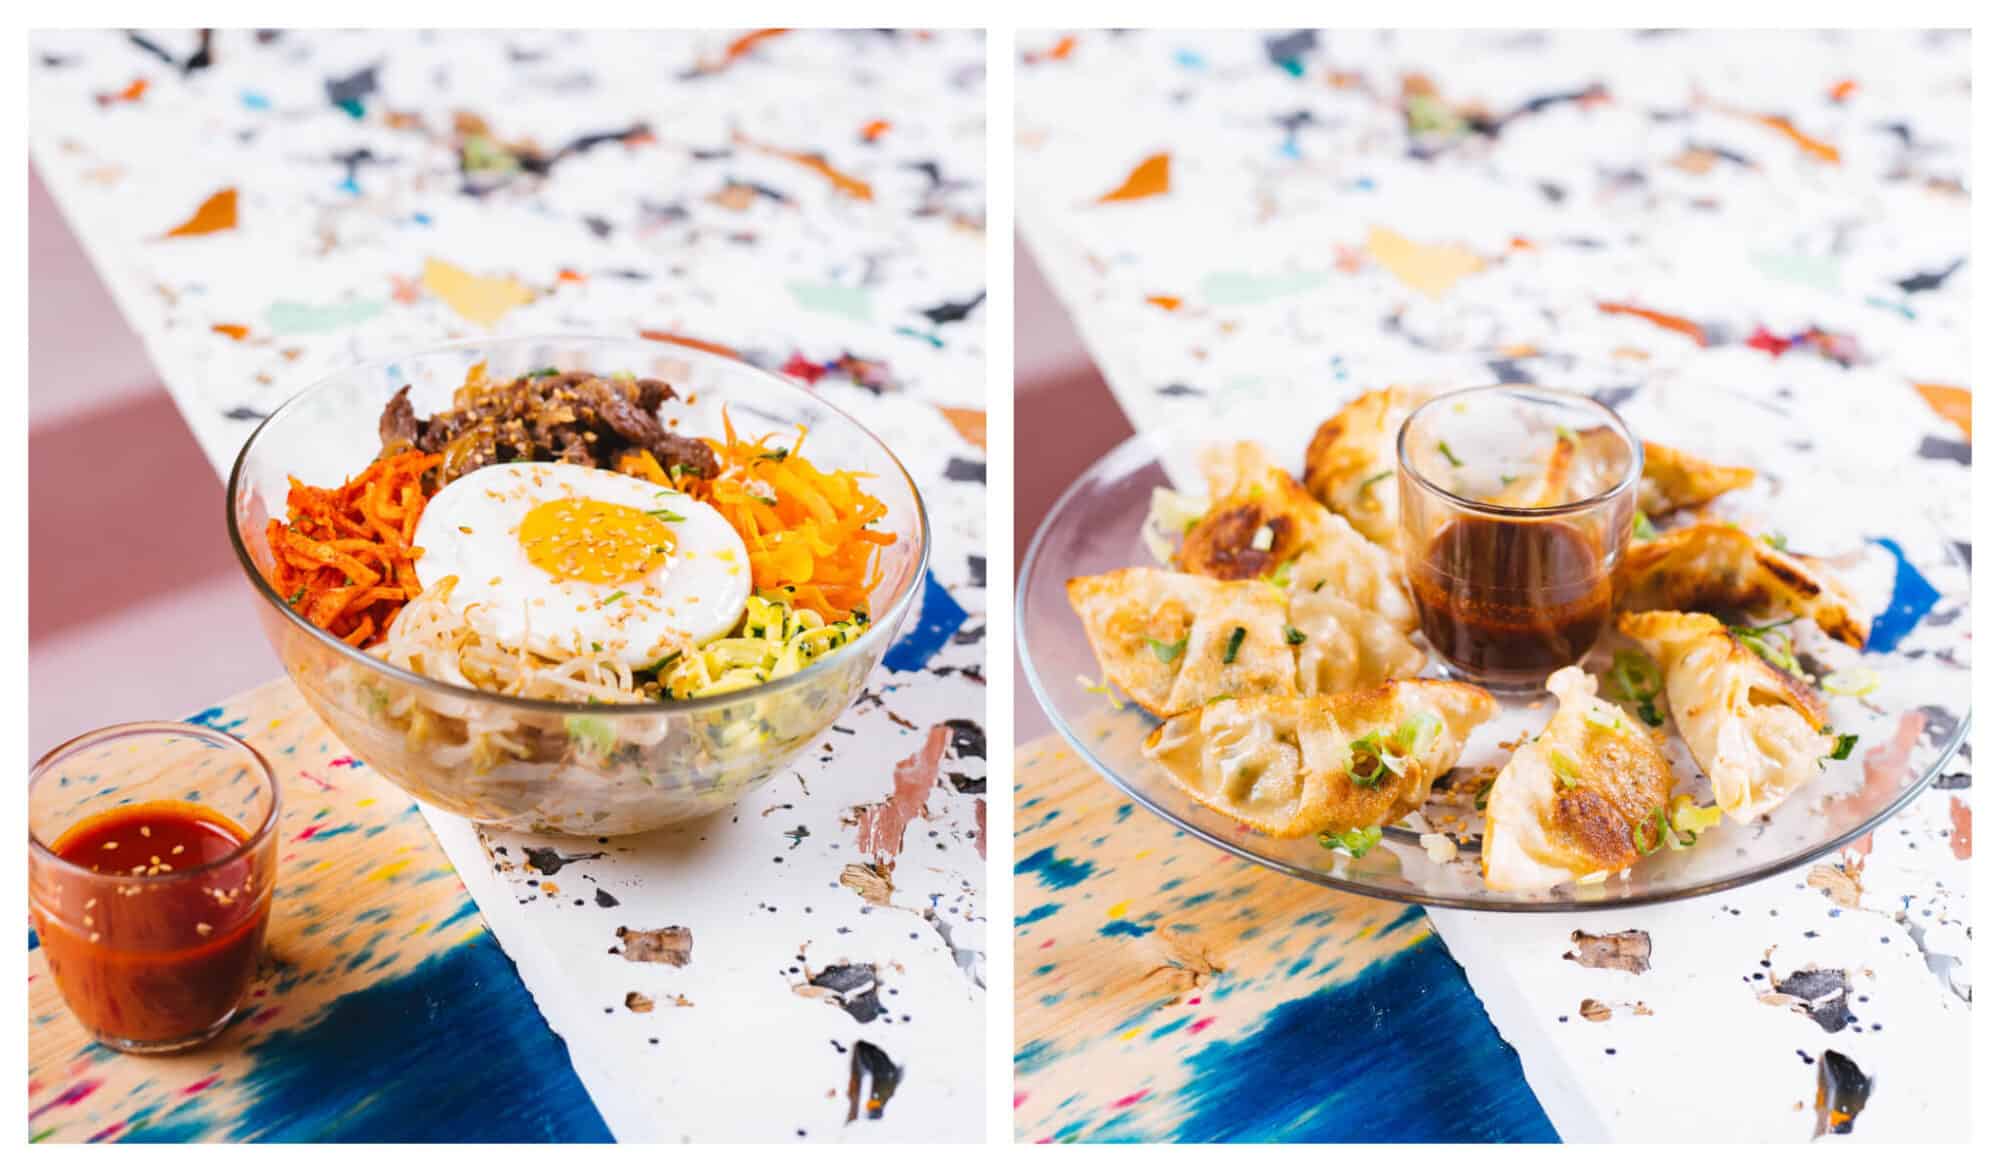 Left: A korean dish of bibimbap with egg on top. Right: A plate of dumplings and its sauce dip in the middle.